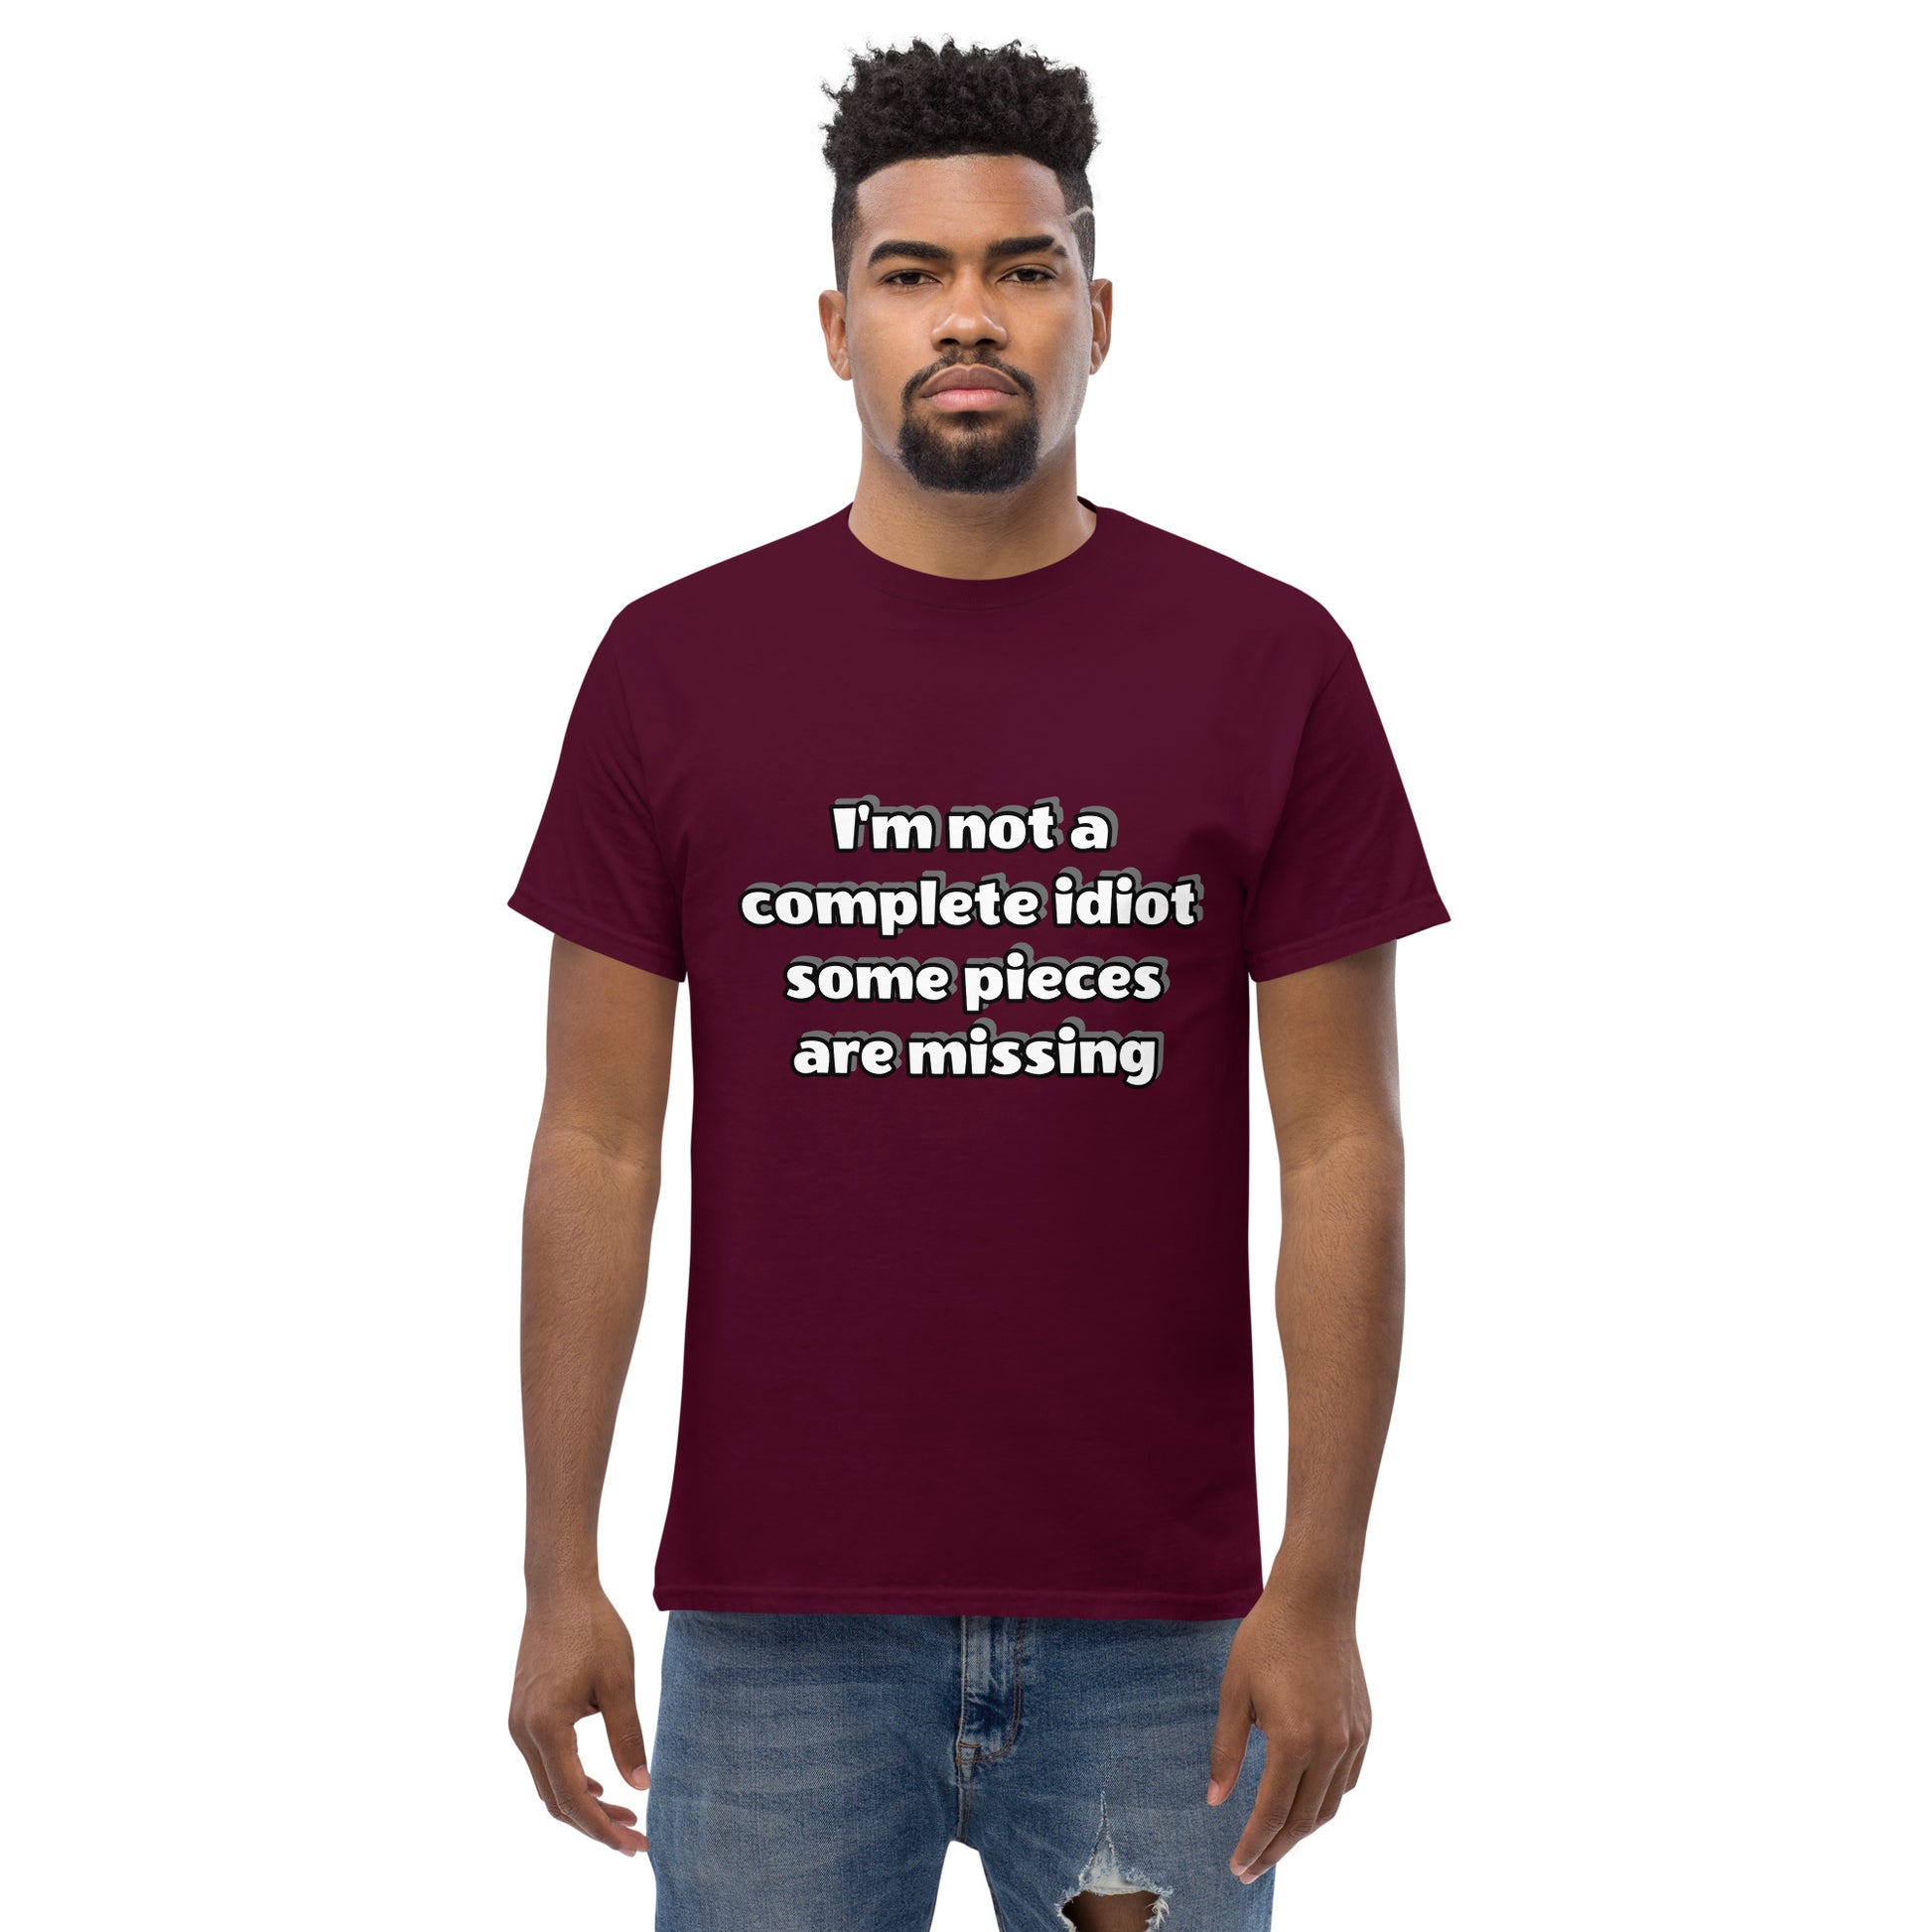 Men with maroon t-shirt with text “I’m not a complete idiot, some pieces are missing”